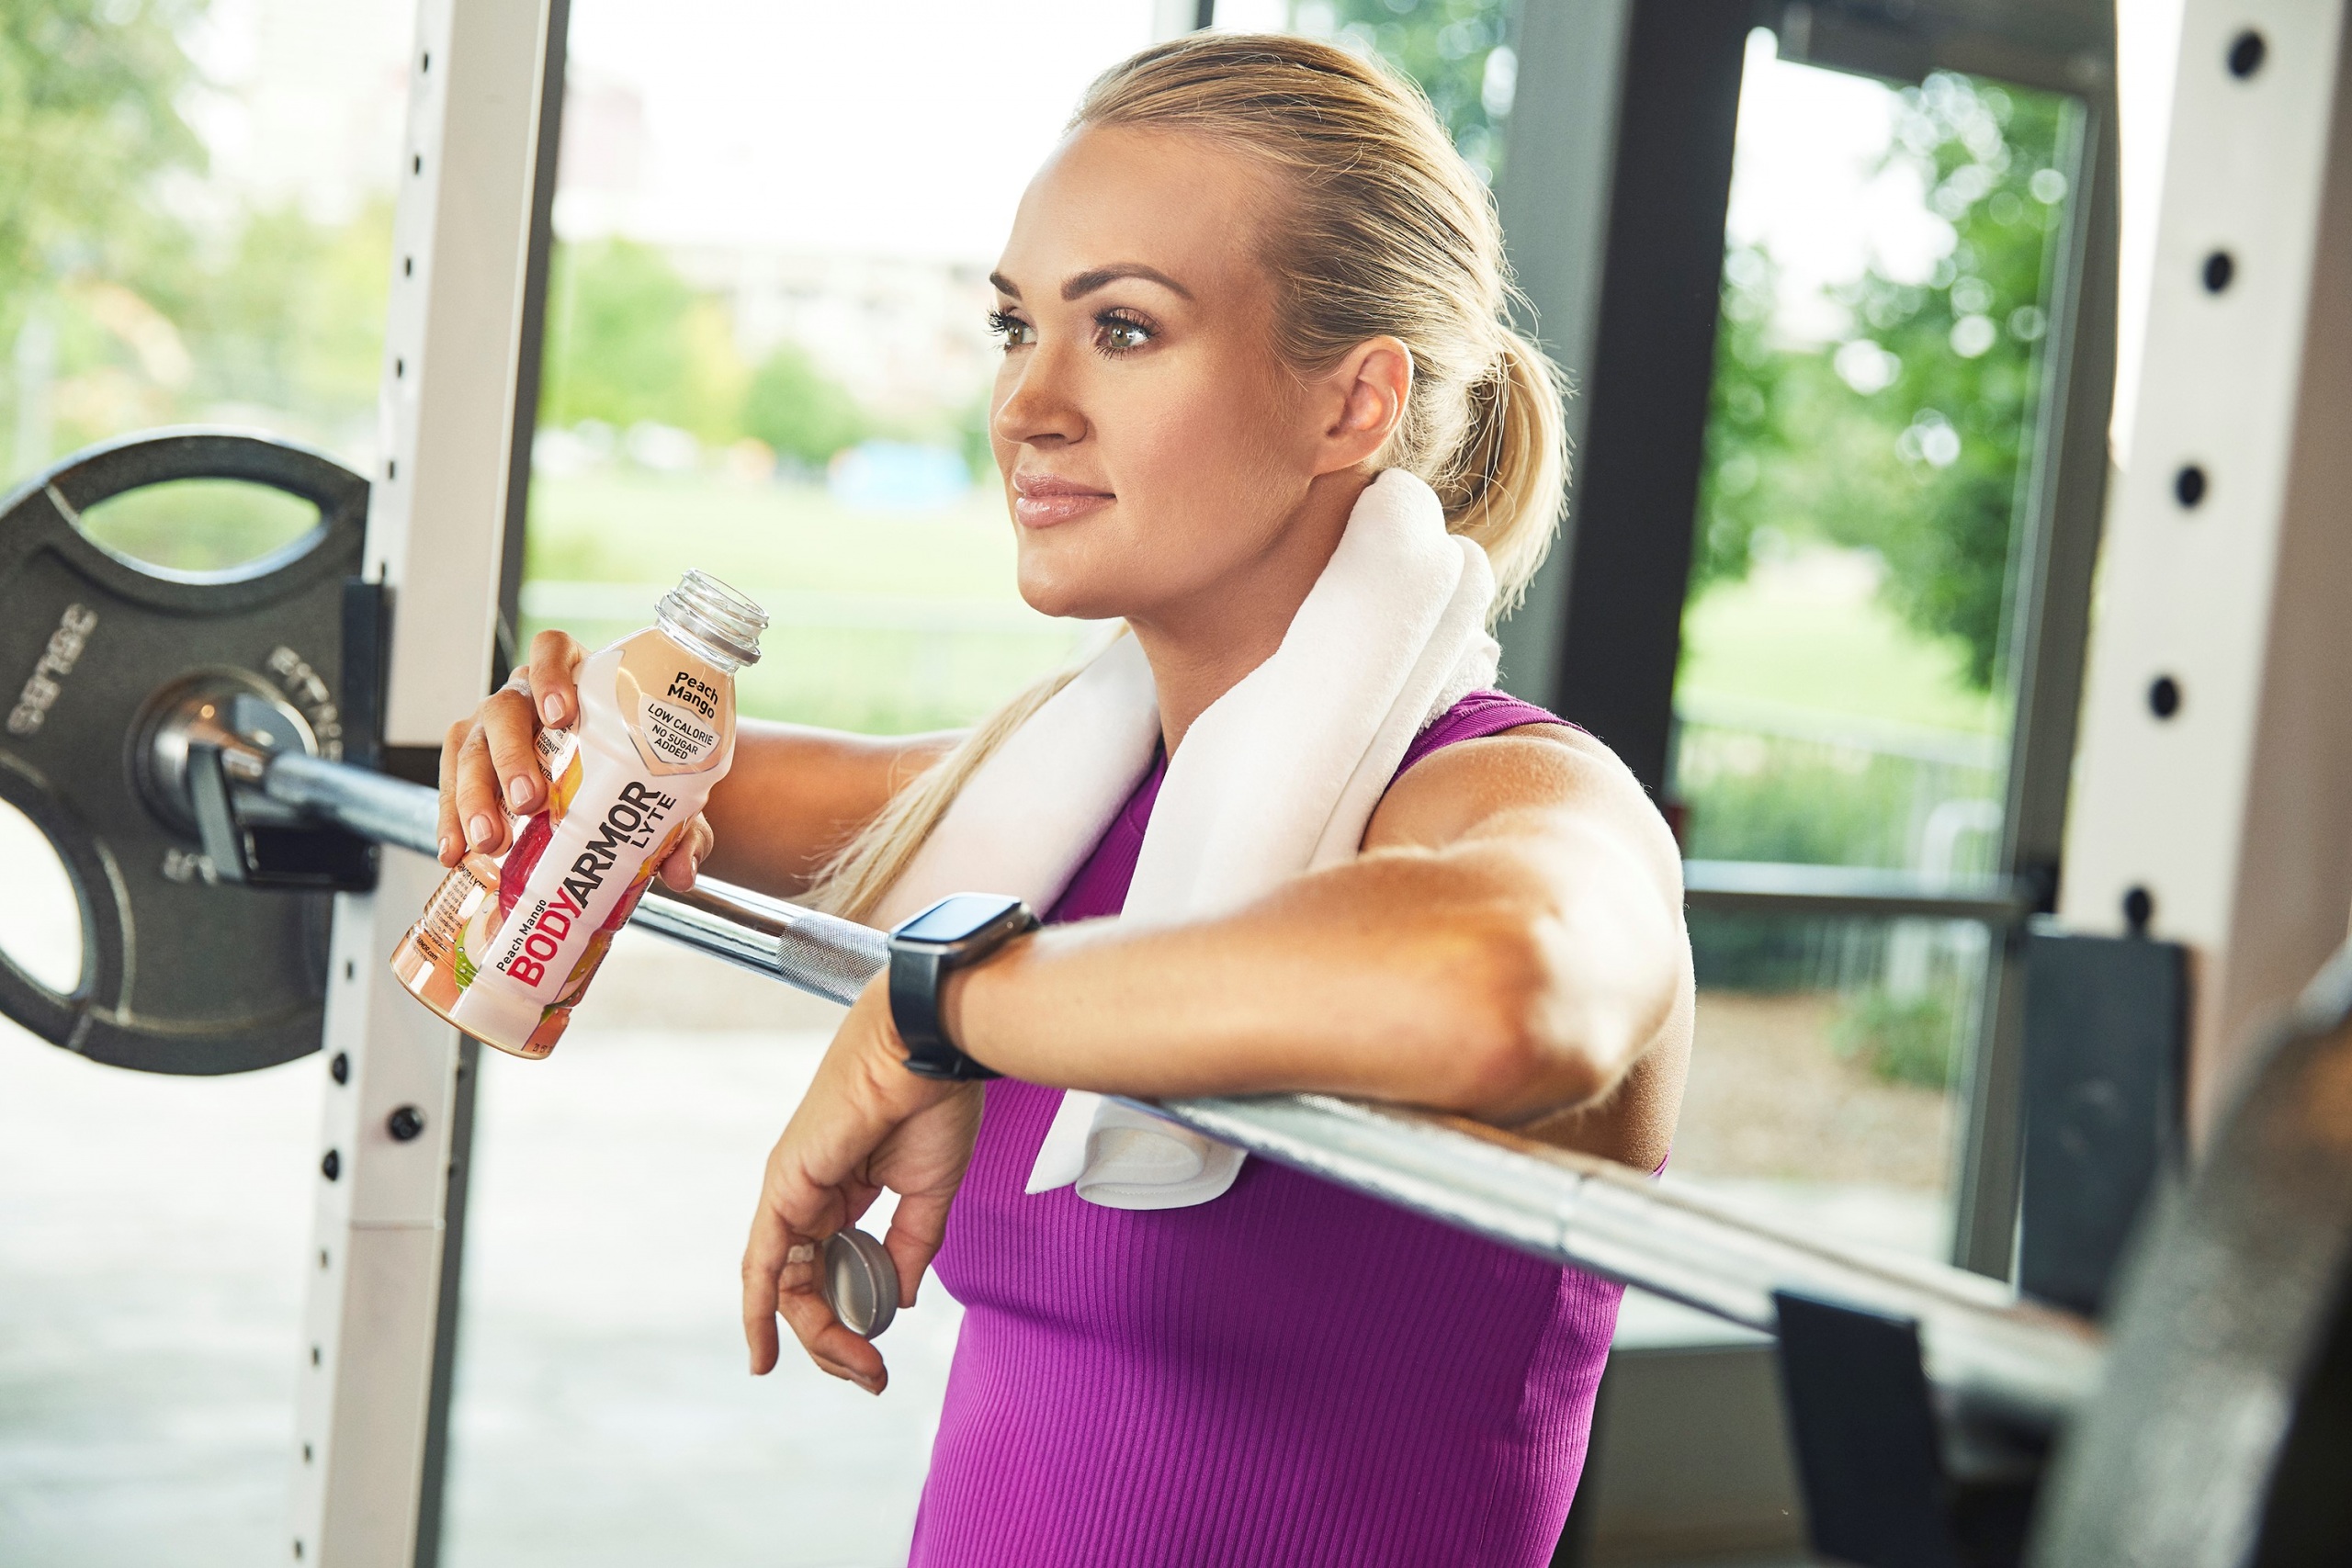 Carrie Underwood, 40, Shares the Fitness Products She Swears By